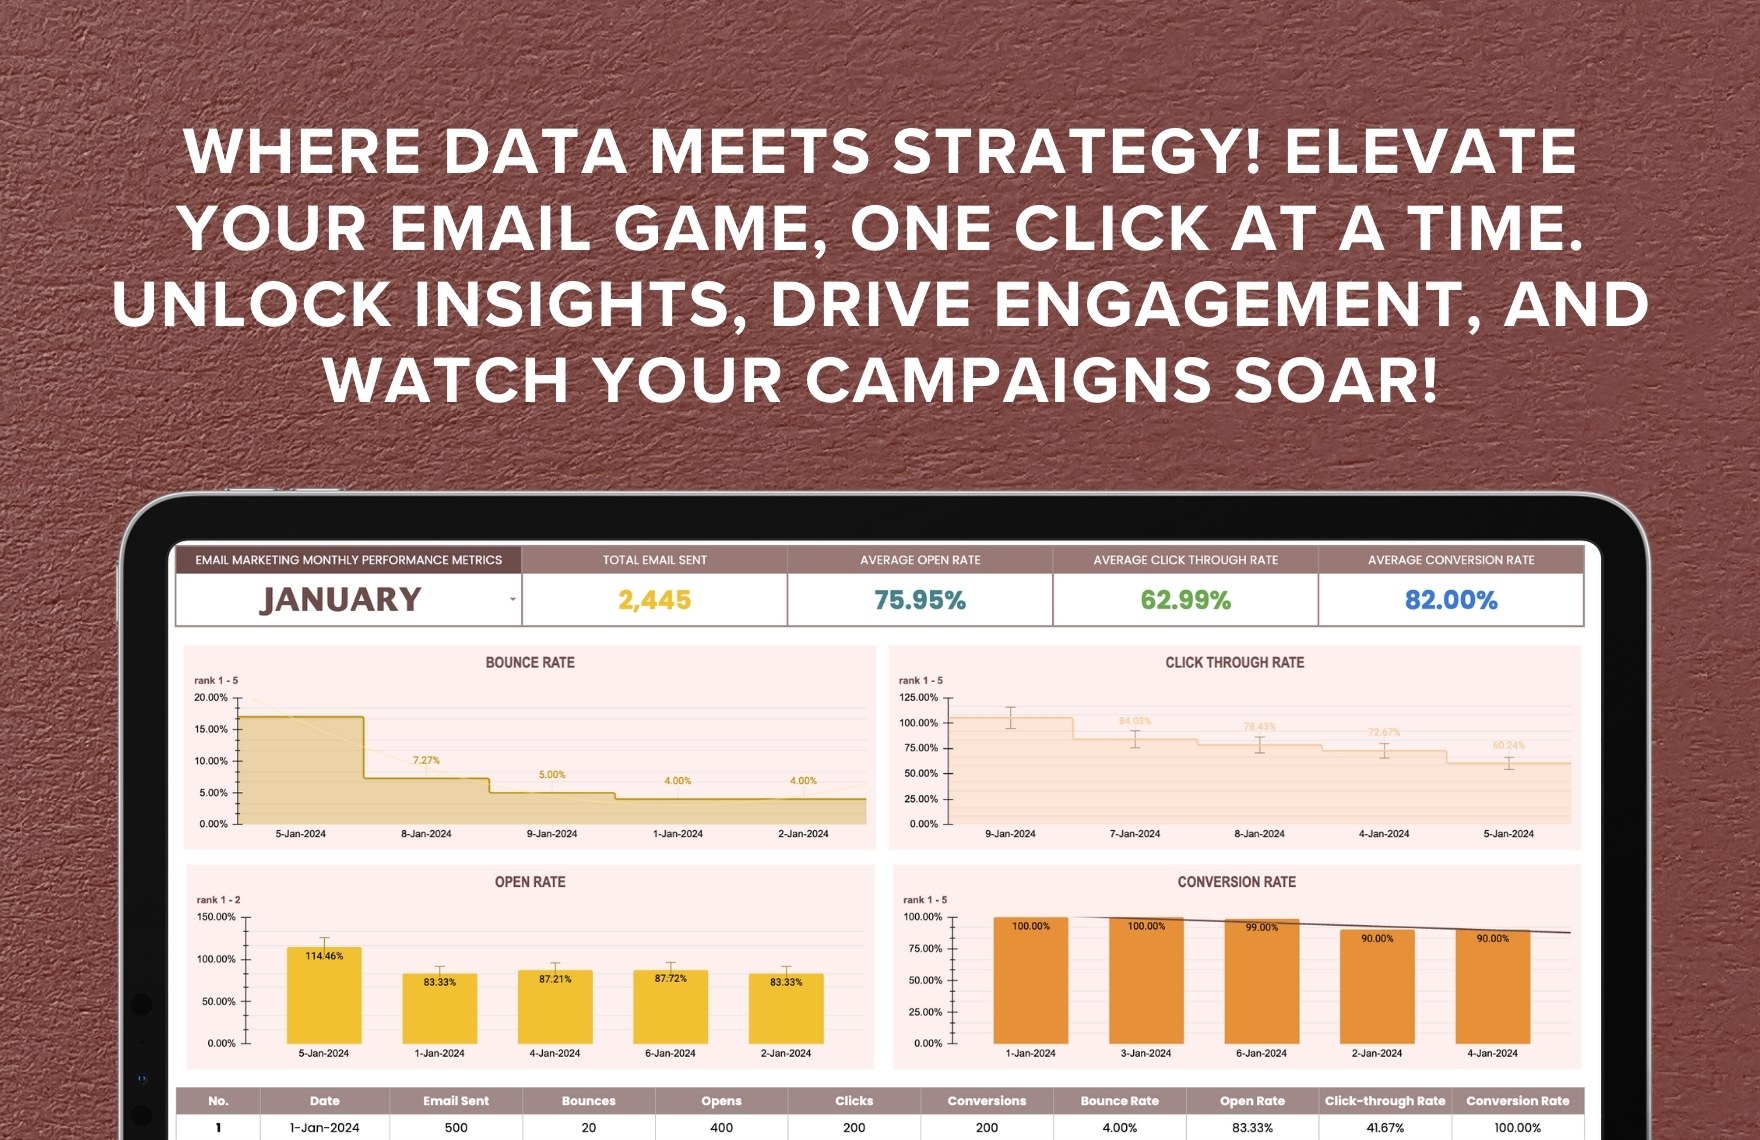 Email Marketing Monthly Performance Metrics Template